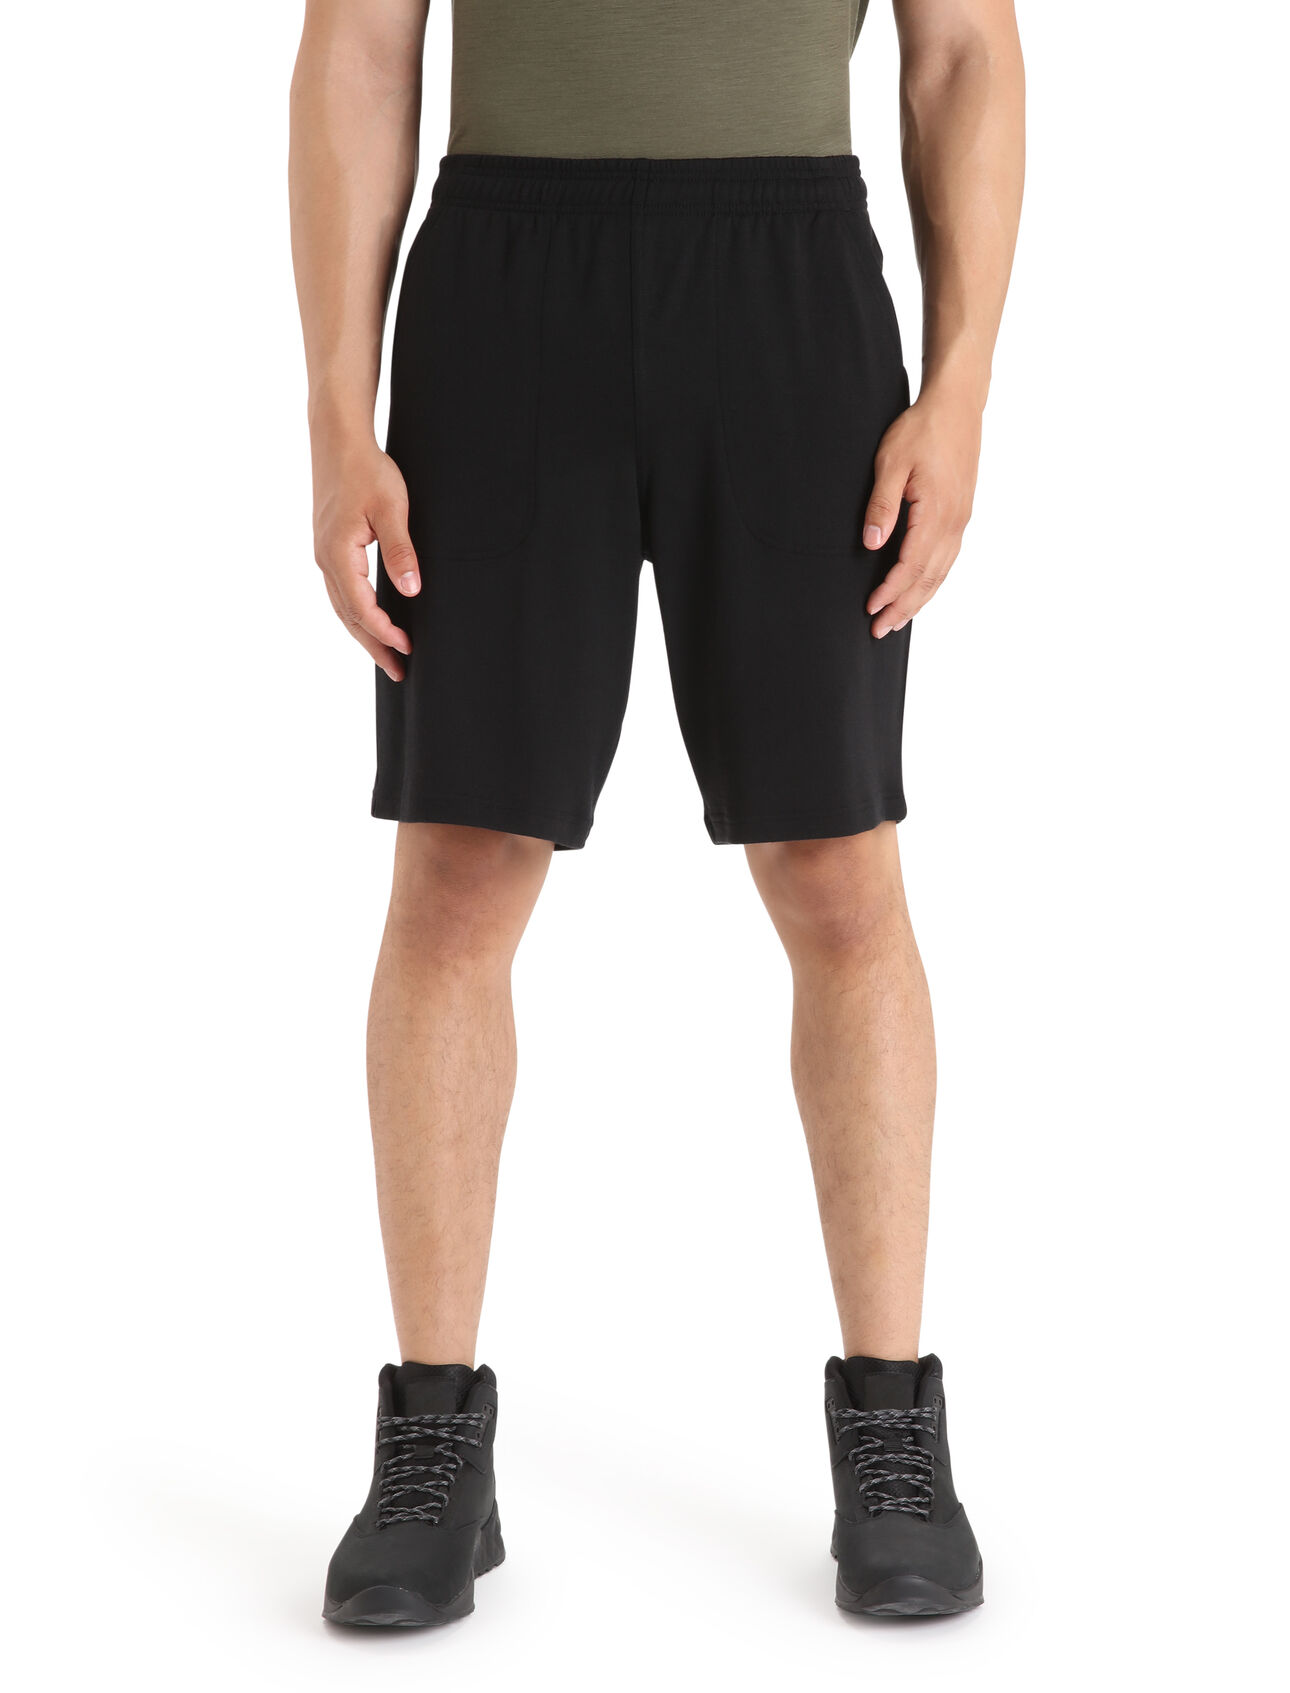 Mens Merino Shifter Shorts Classic sweat shorts with a modern twist thanks to soft, 100% merino wool terry fabric, the Shifter Shorts are styled and dialed for everyday comfort.